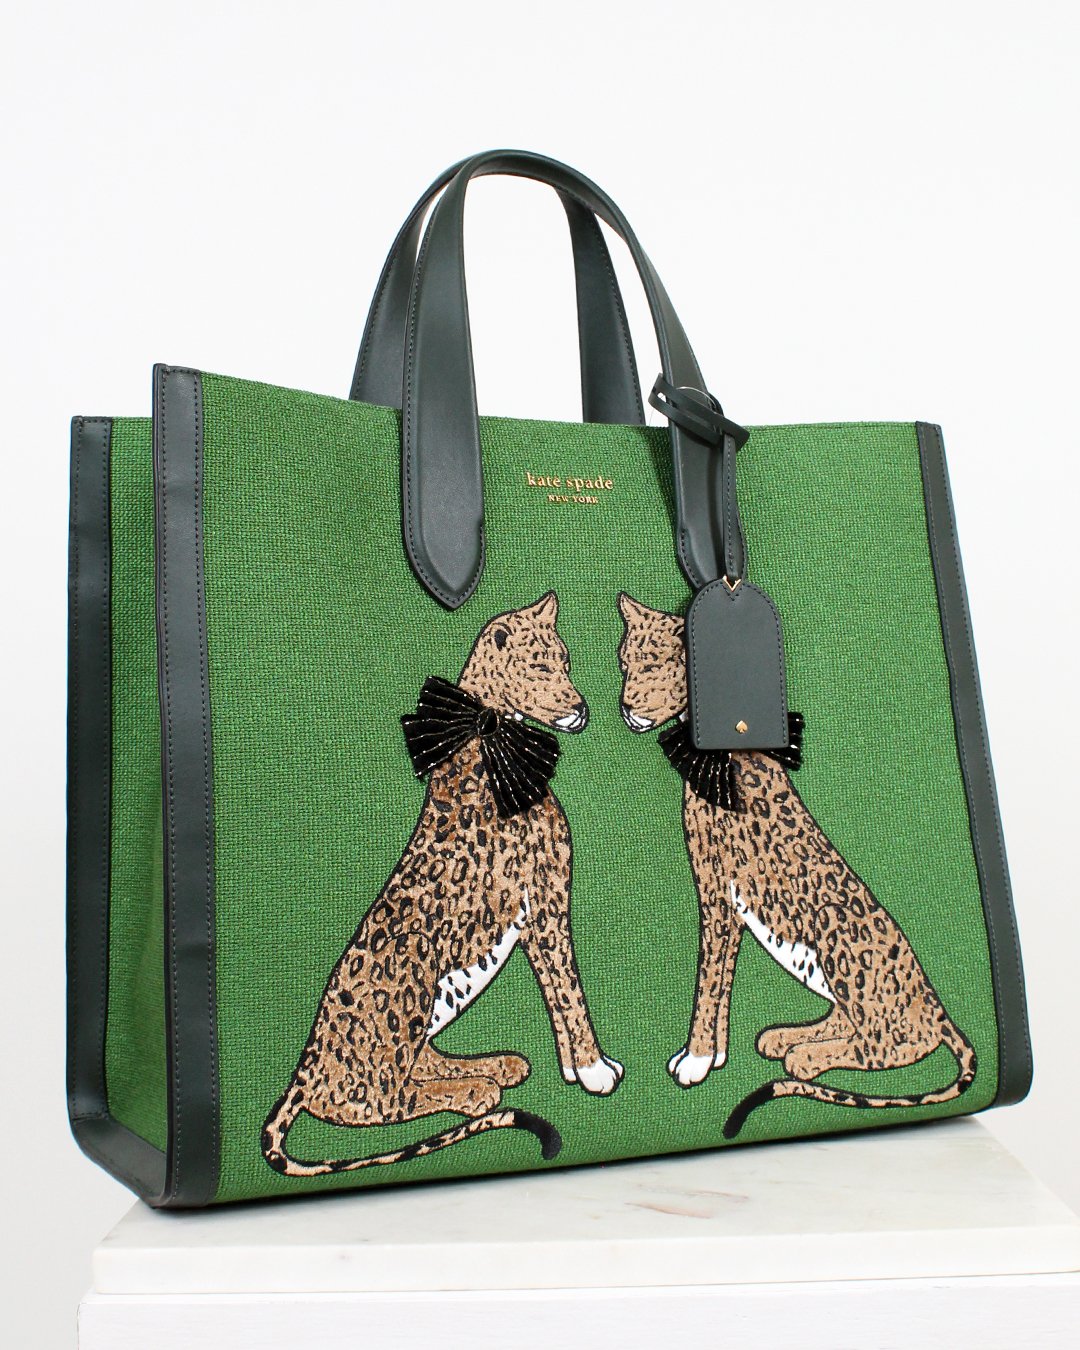 Kate Spade New York MANHATTAN LADY LEOPARD LARGE TOTE Excellent